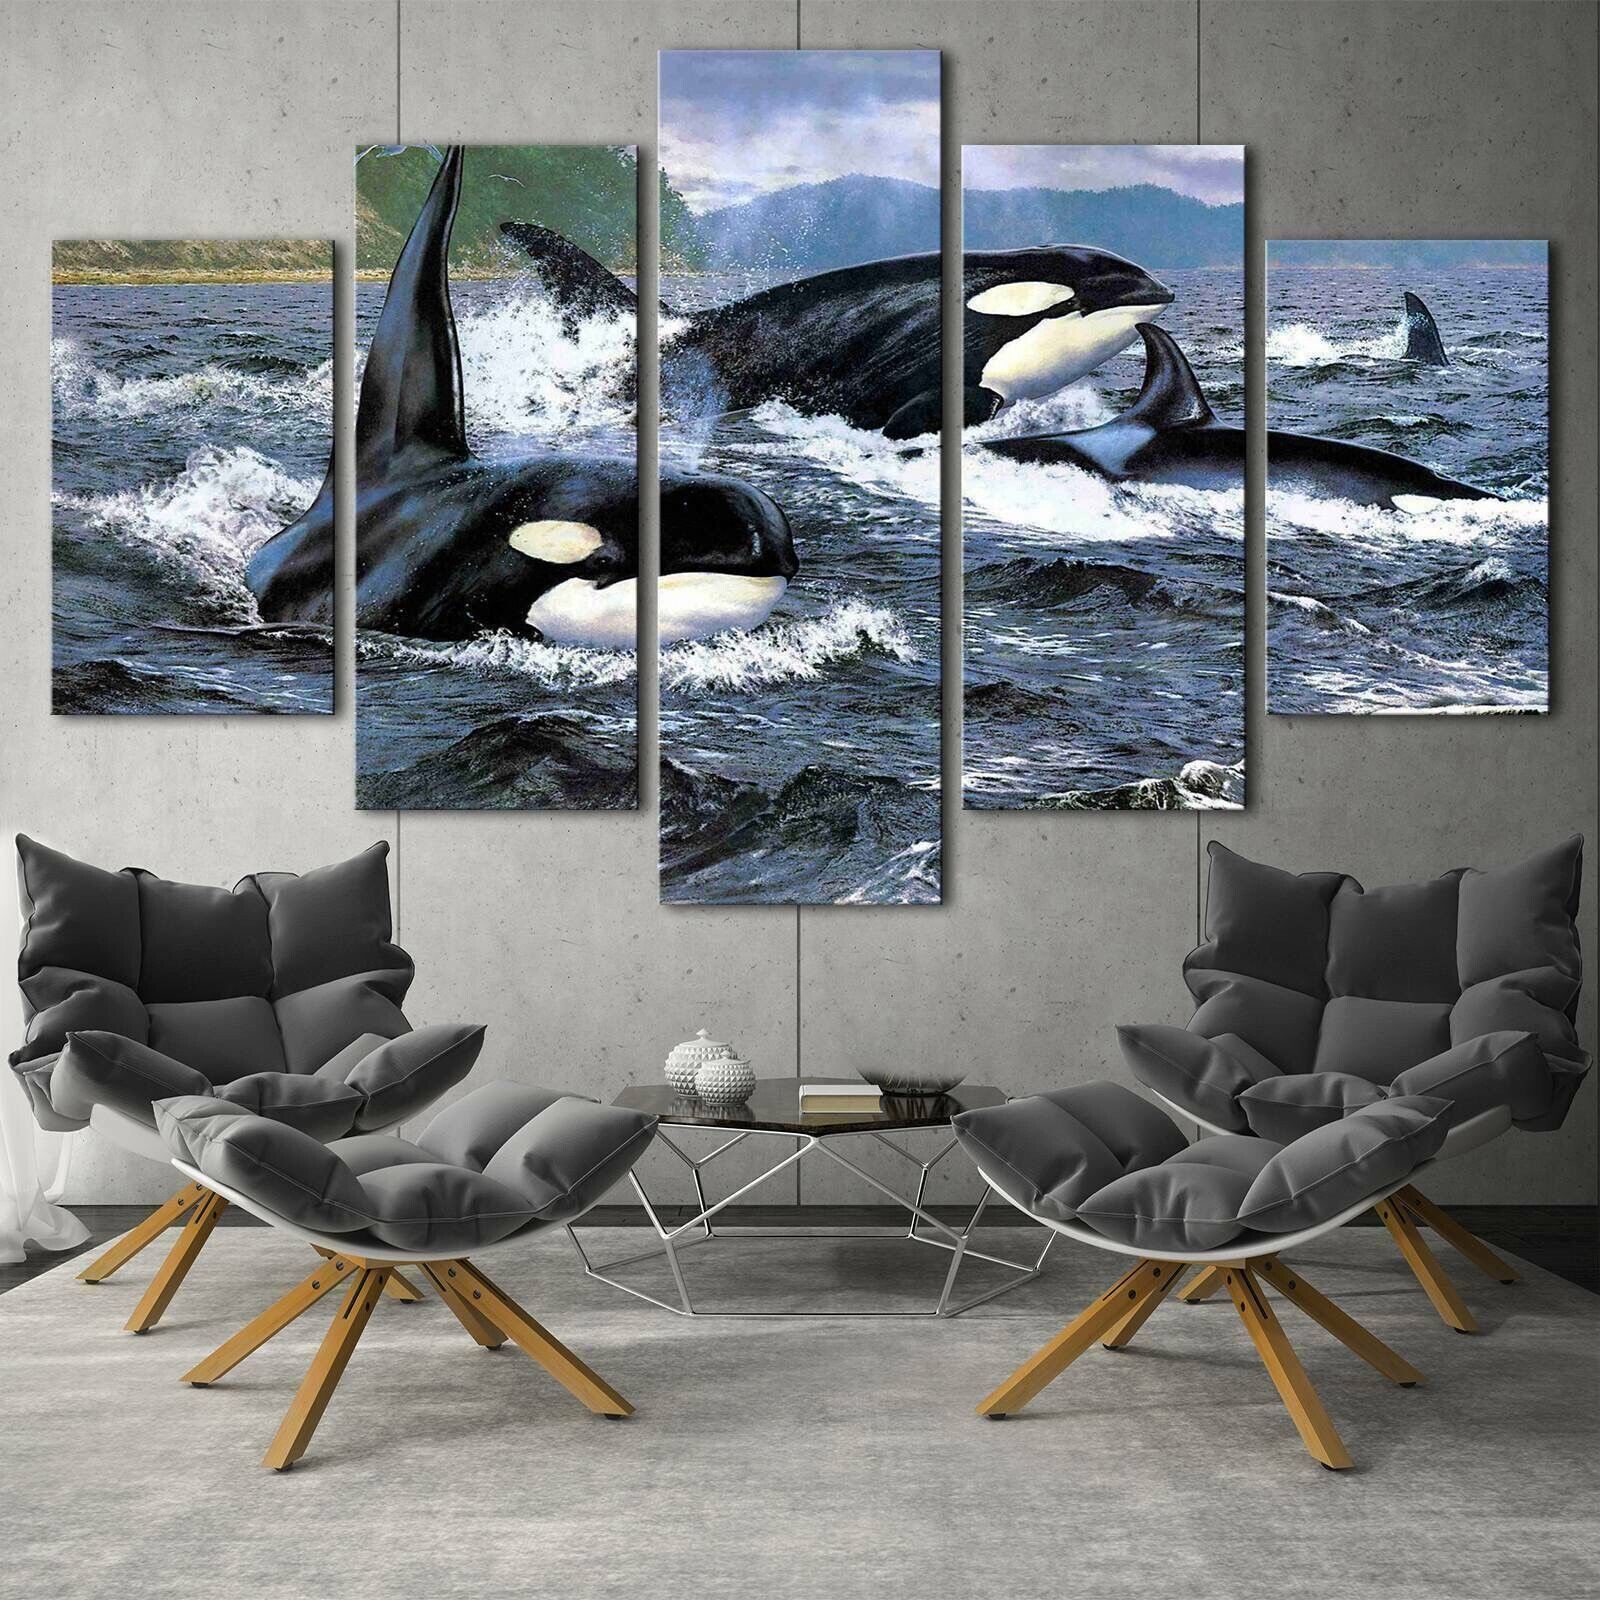 Orca Stration Killer Whale Ocean Poster 5 Panel Canvas Print Wall Art Home  Decor | Ebay For 2018 Whale Wall Art (View 19 of 20)